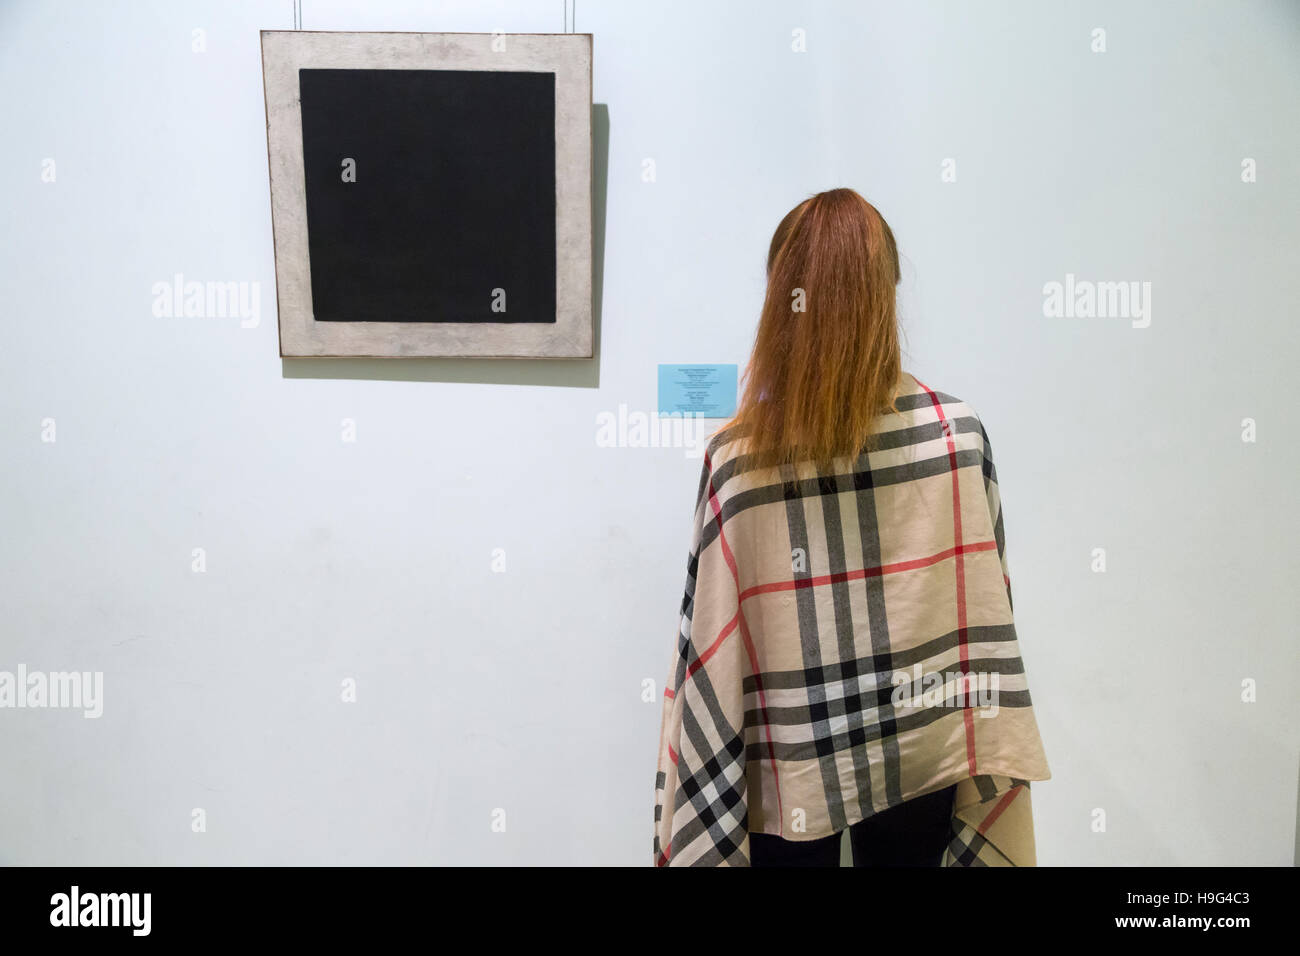 A visitor in front of Kazimir Malevichs painting 'Black Suprematist Square' at The Hermitage Gallery in St Petersburg, Russia Stock Photo